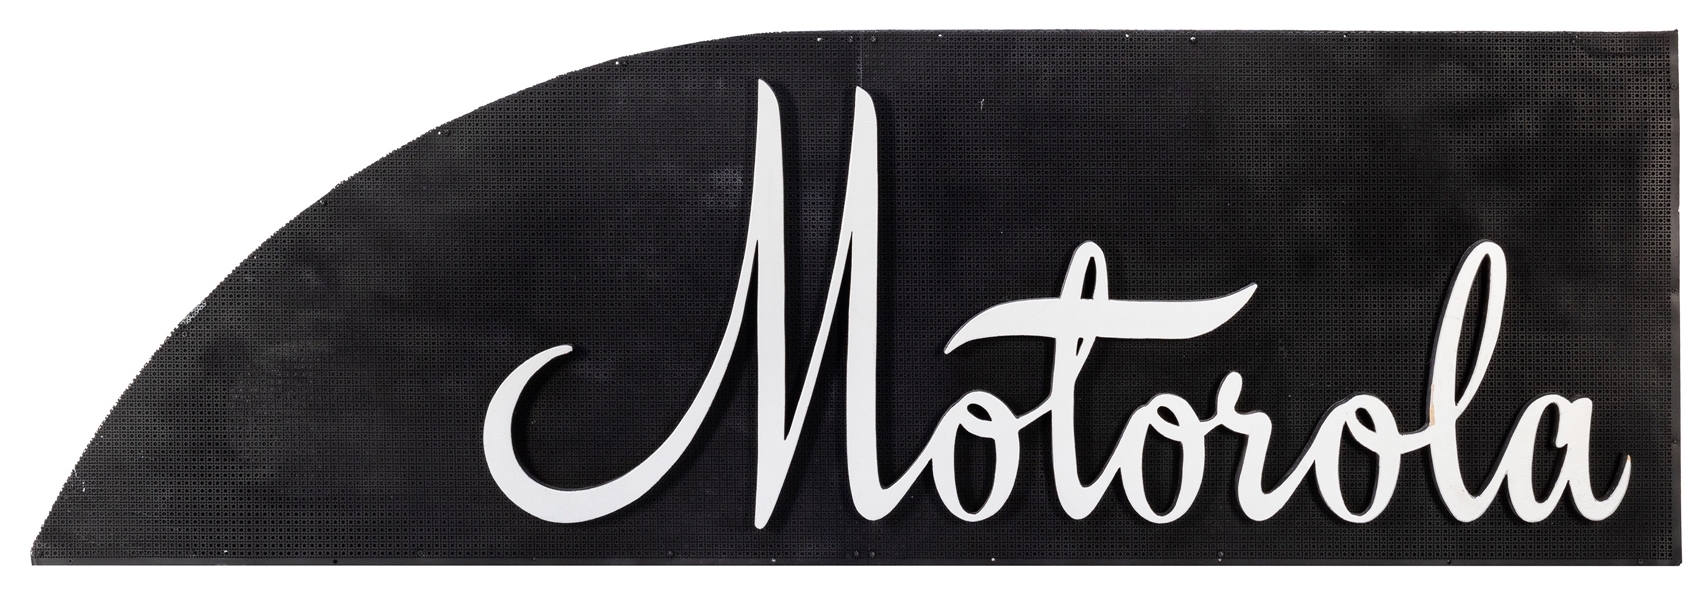  Motorola Television Hour Backdrop Sign. 1950s. Wood and pla...